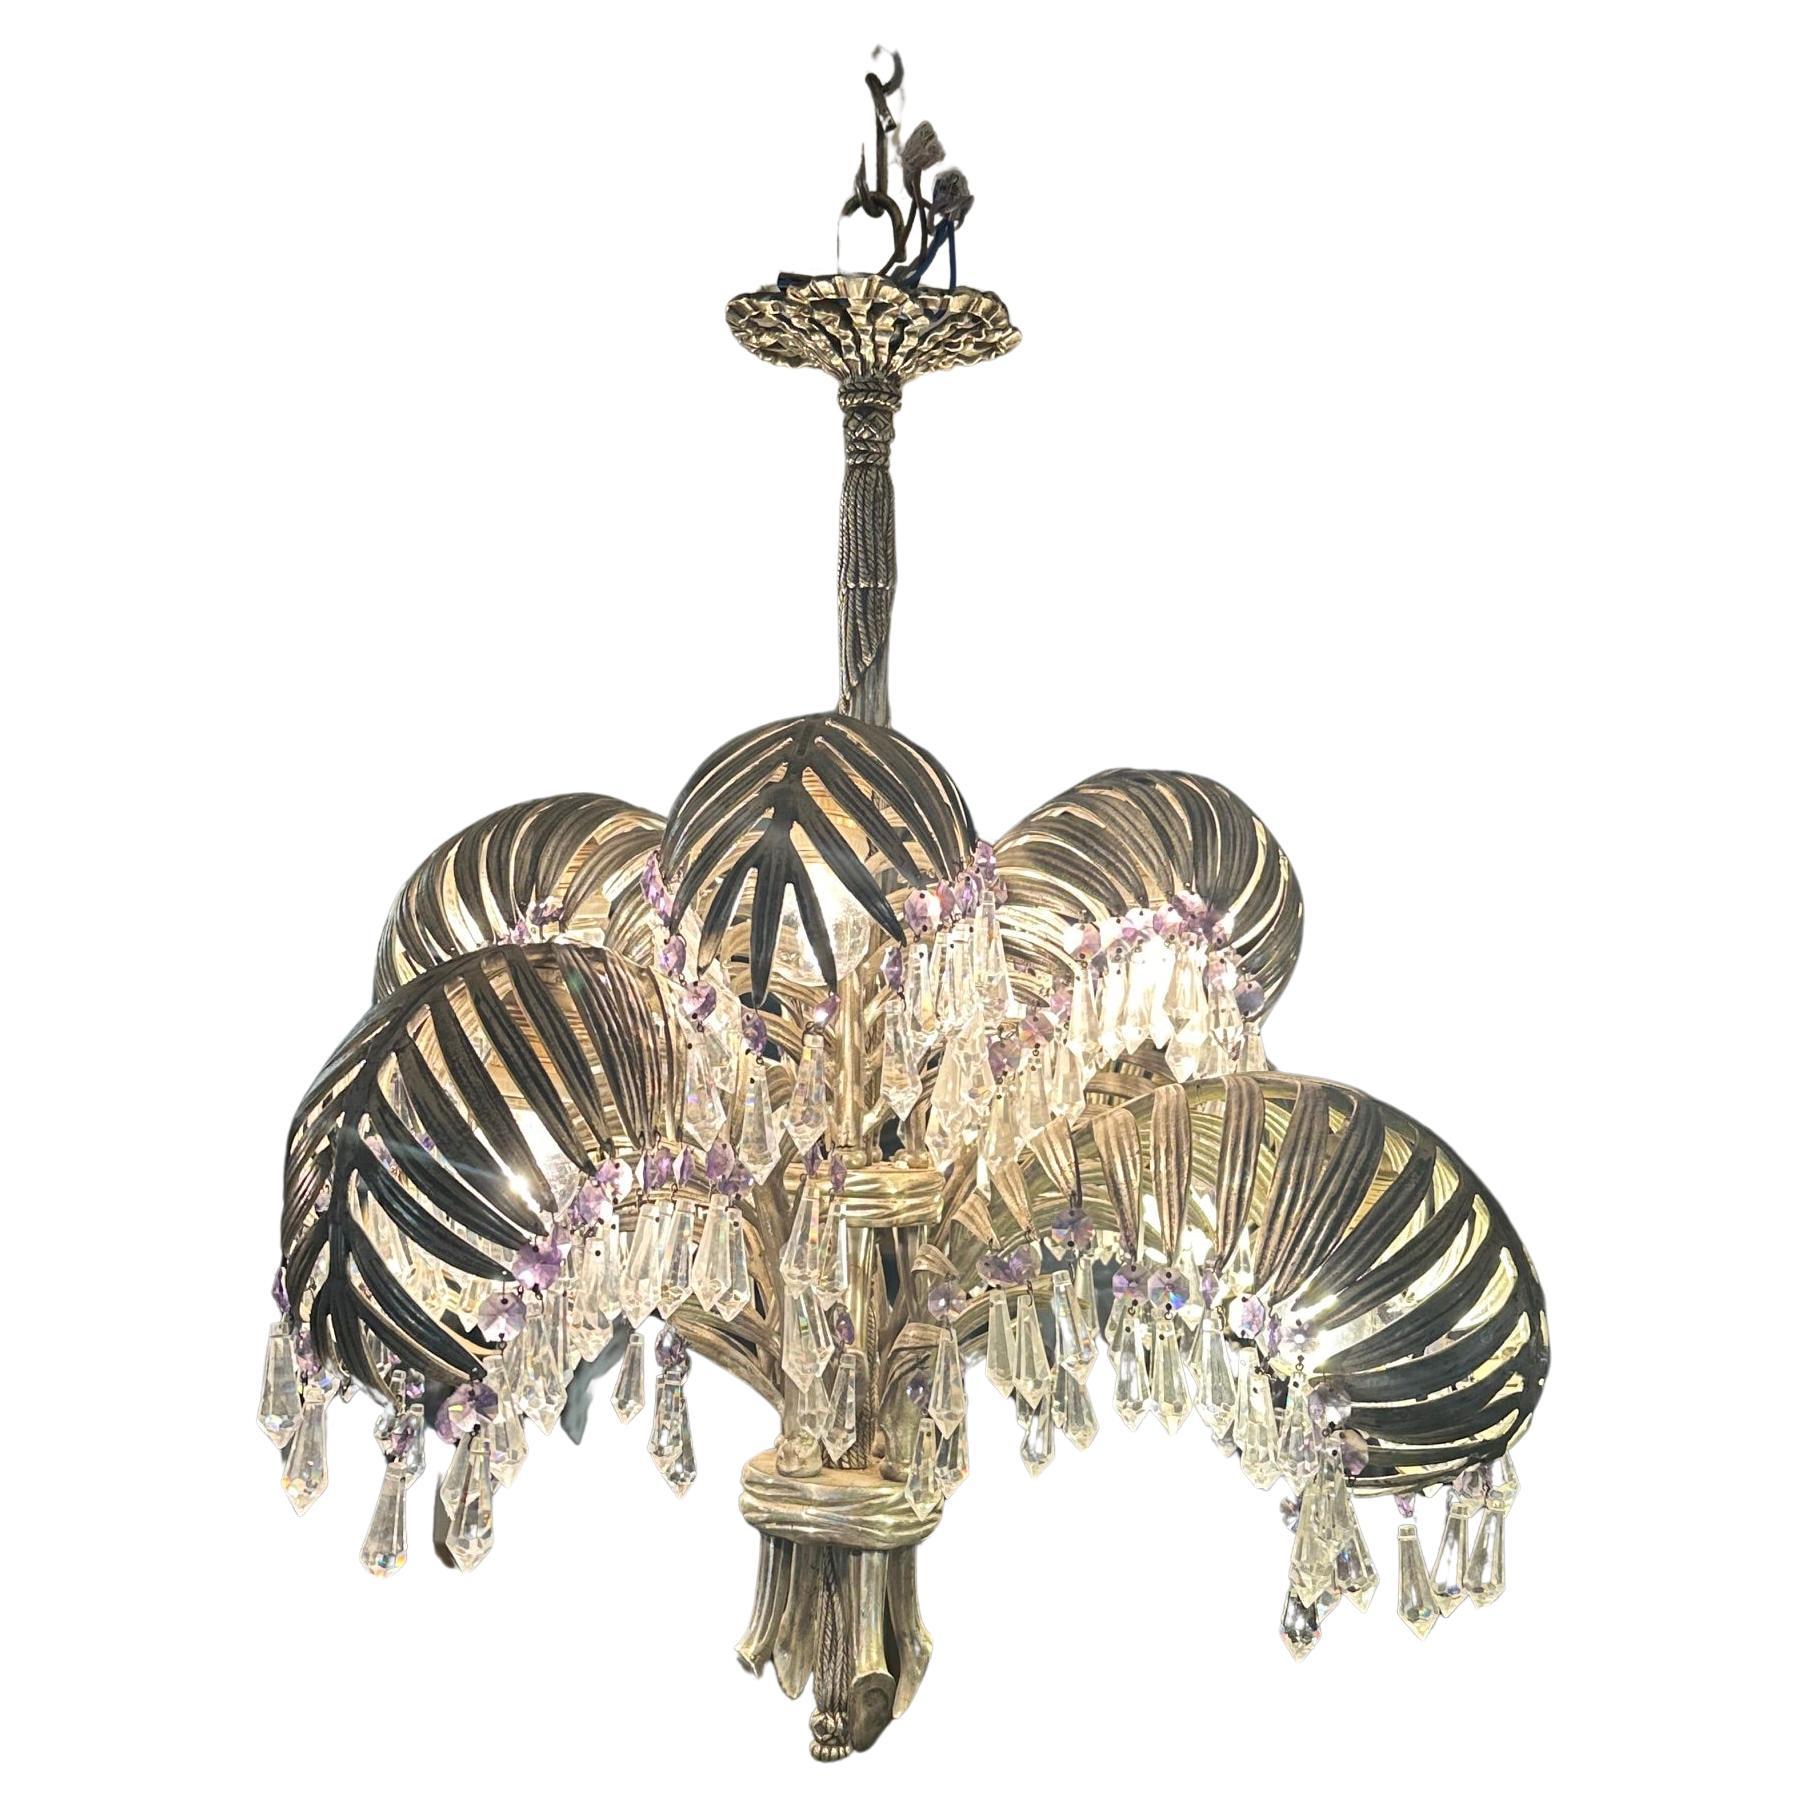 20th century Art nouveau Period Silver Bronze and Crystal Palms Chandeliers  For Sale